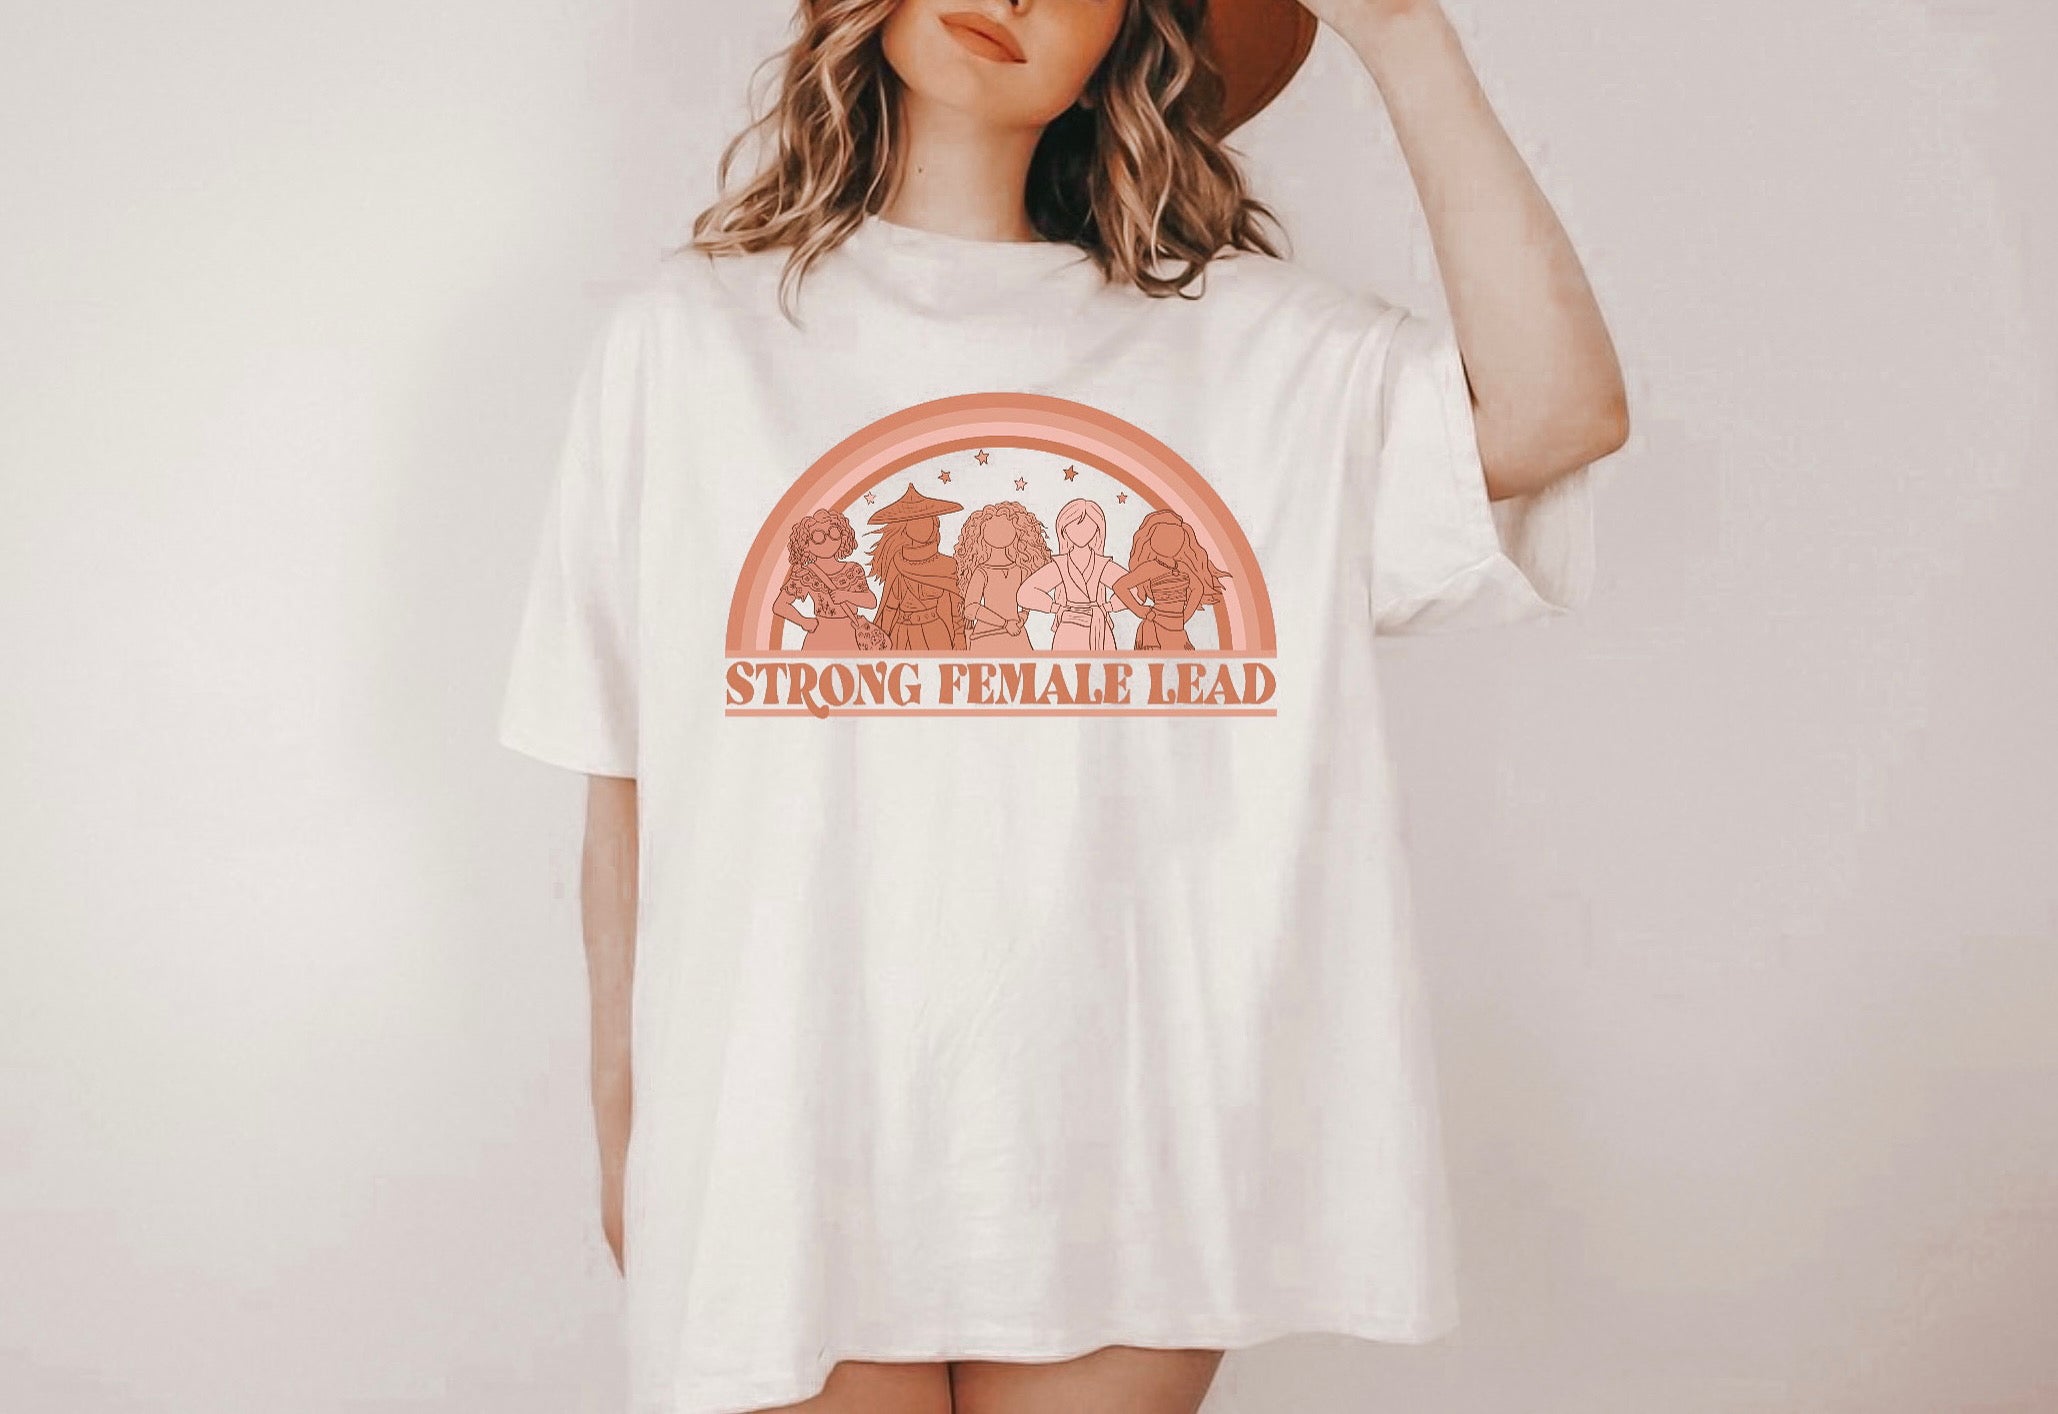 Strong Female Lead Adult T-Shirt